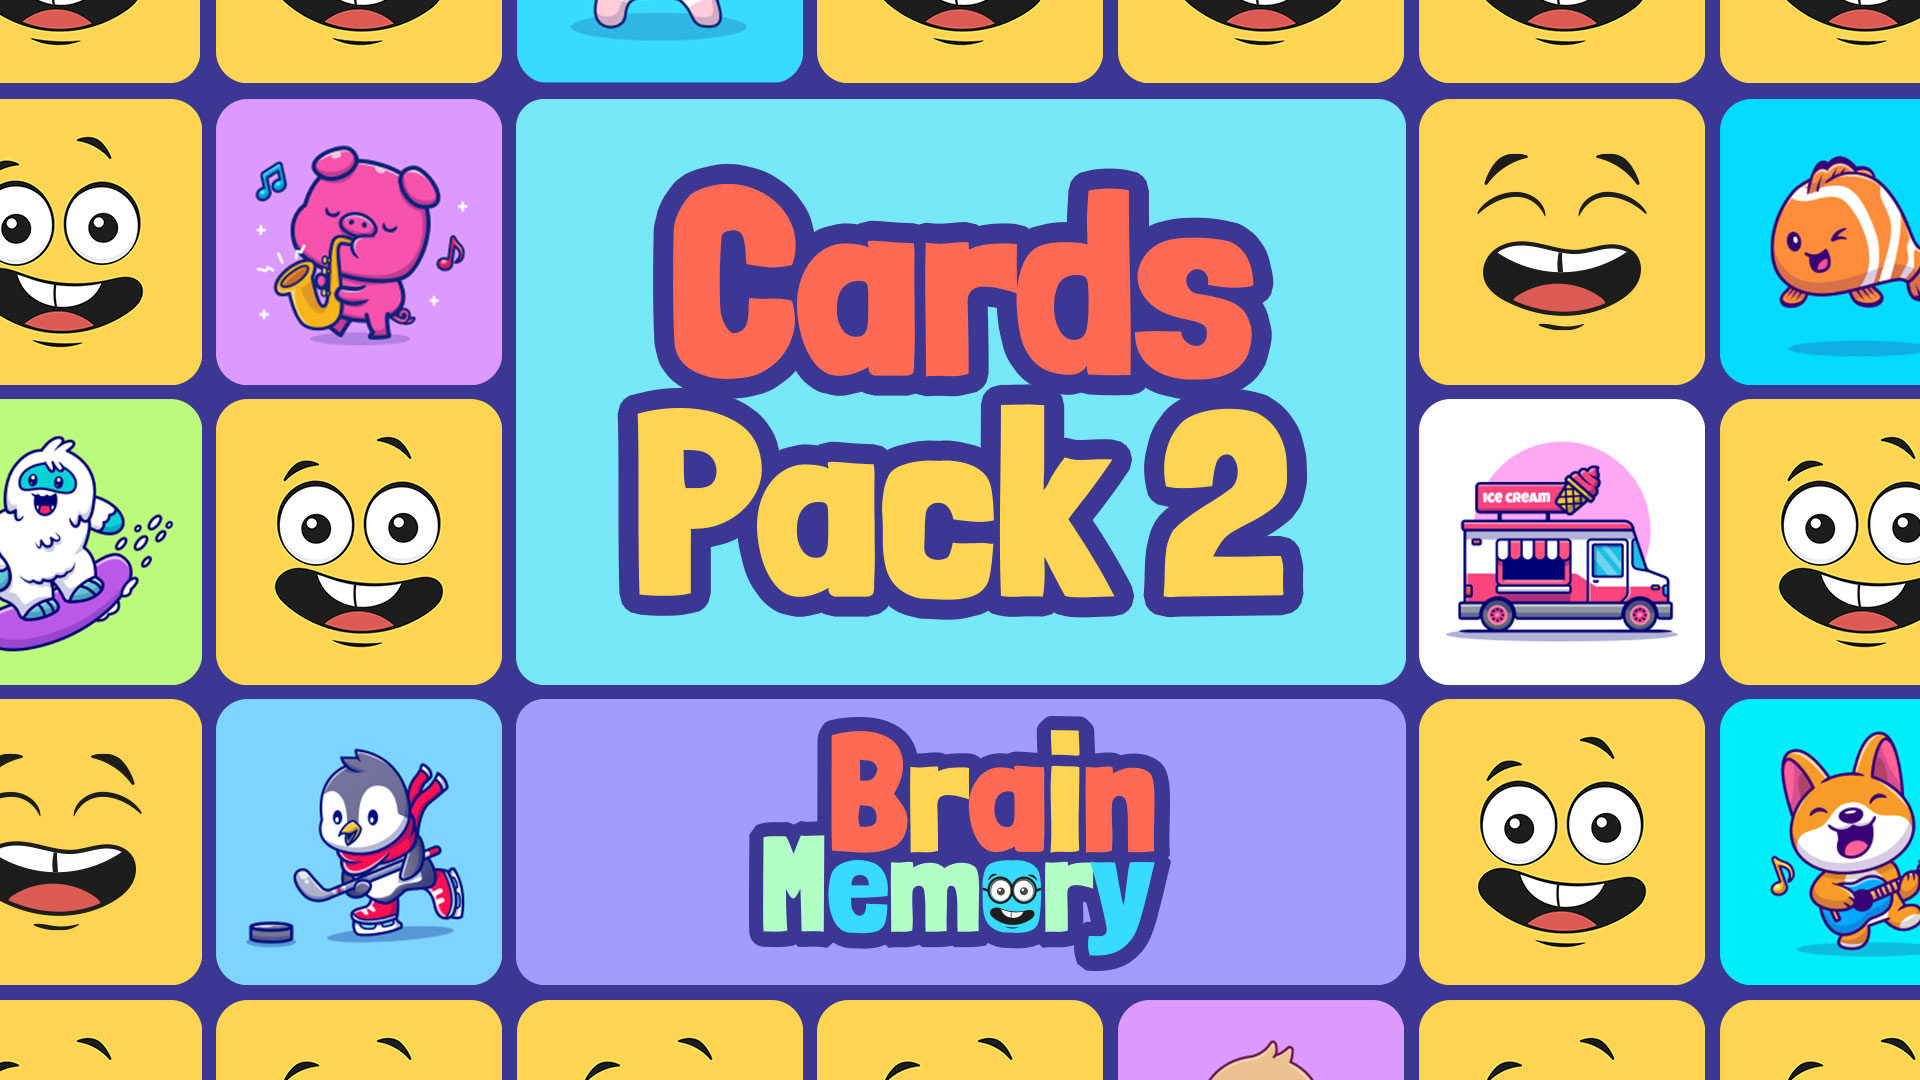 Cards Pack 2